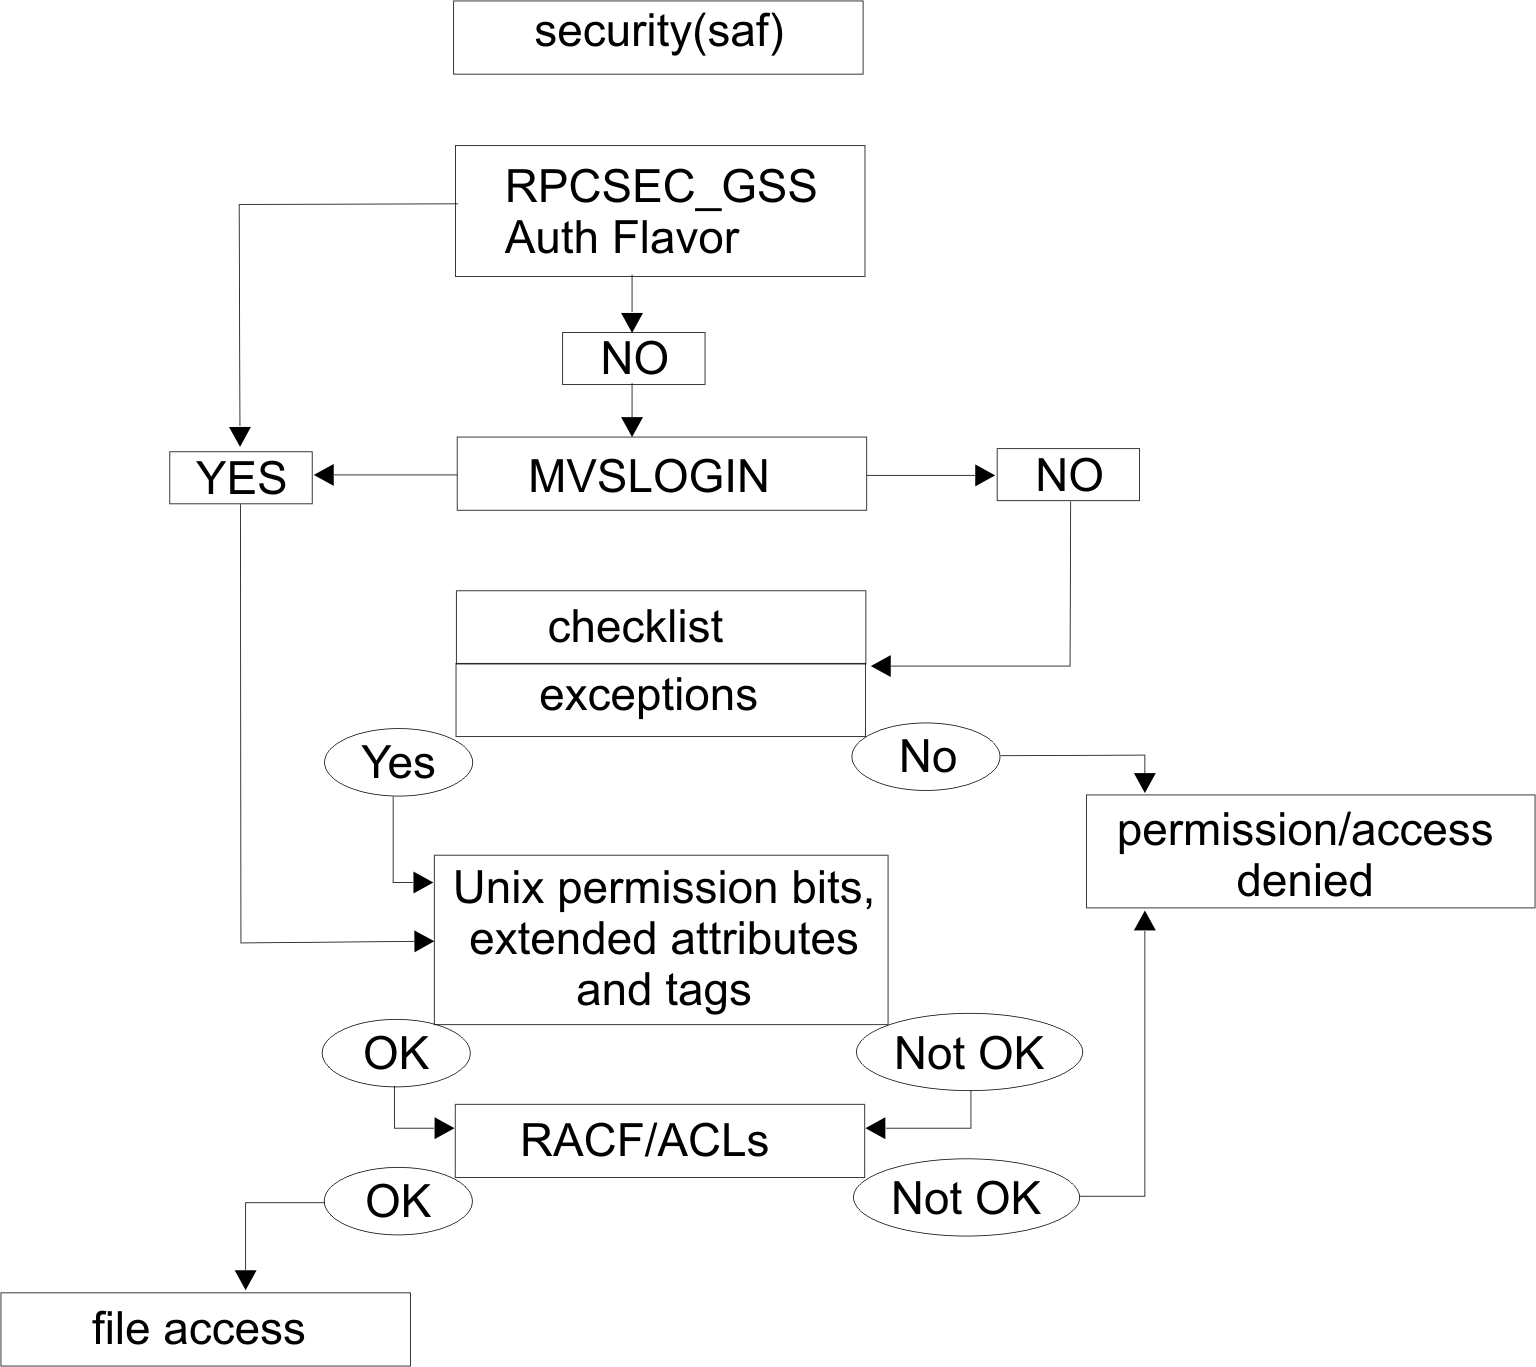 Permission checking for the security(saf) attribute